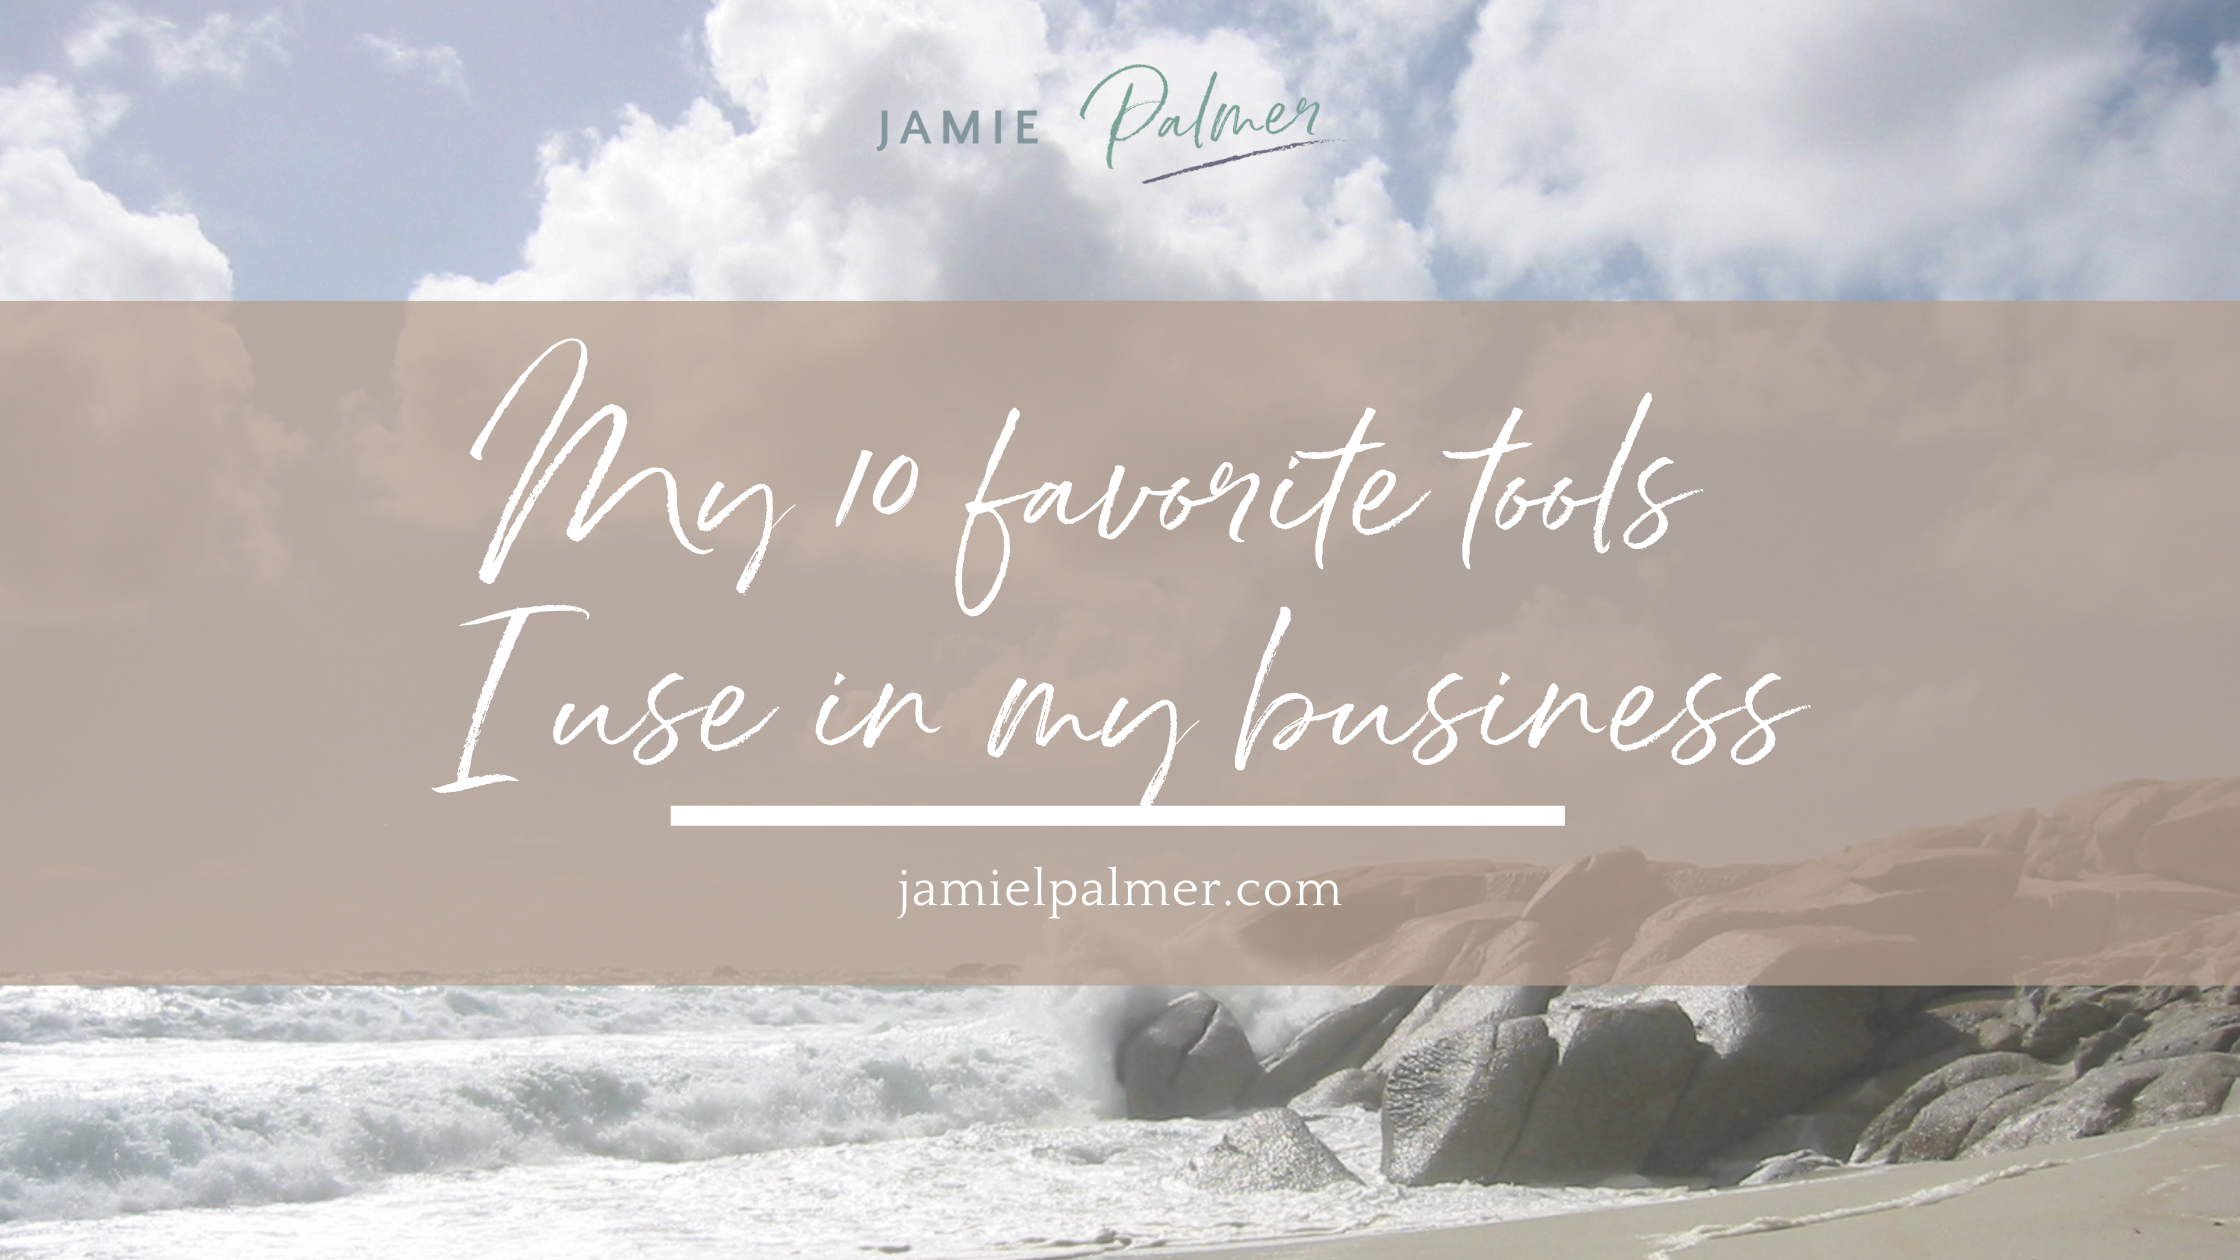 My 10 Favorite Tools I use in my business